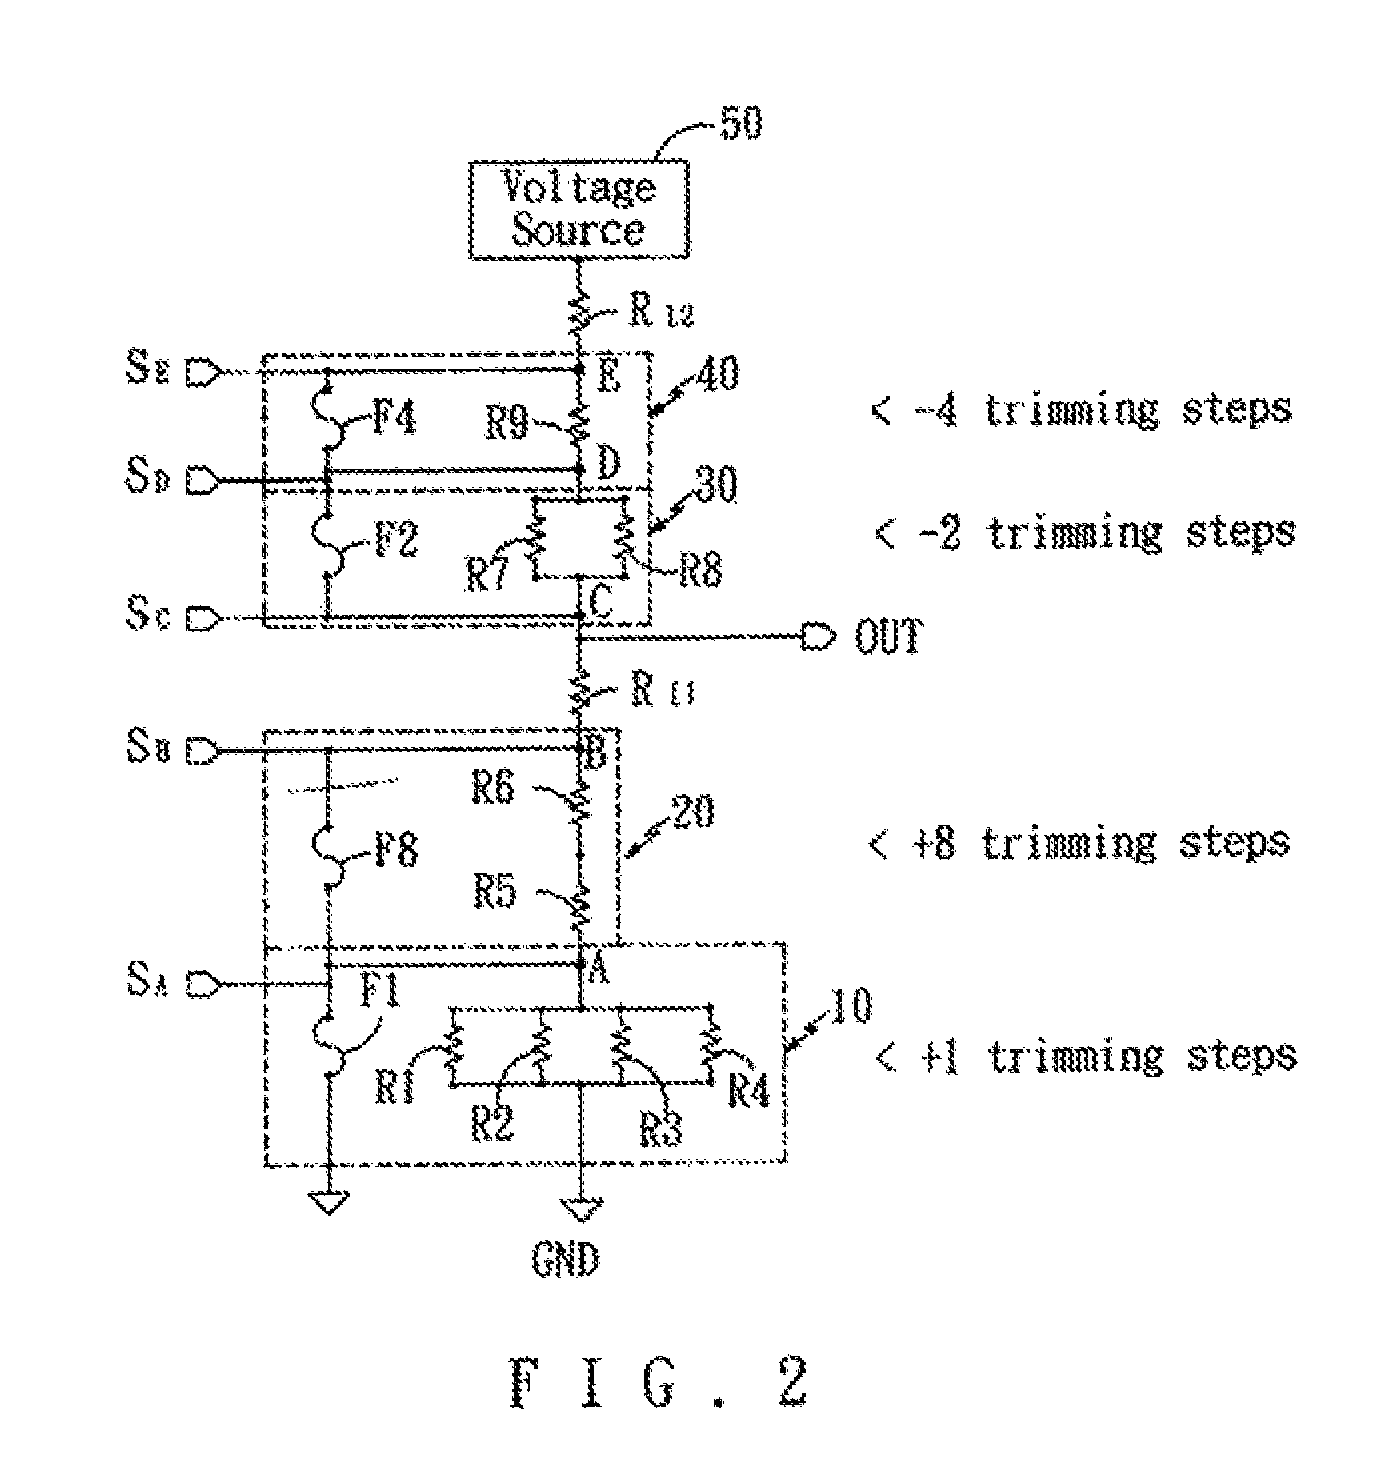 Circuit for adjusting reference voltage using fuse trimming